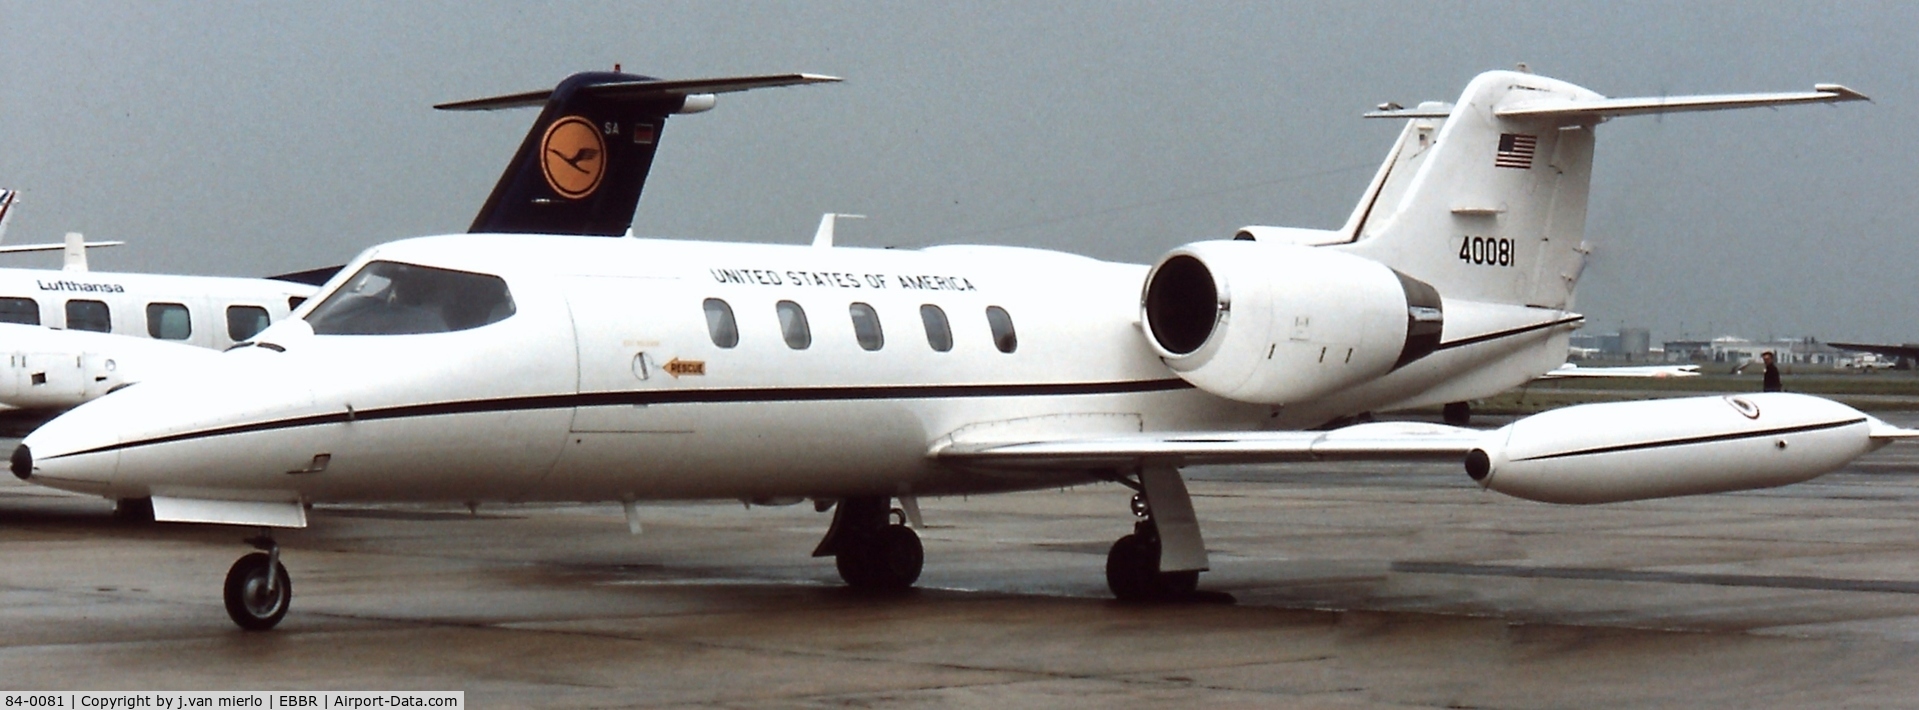 84-0081, 1984 Gates Learjet 35A (C-21A) C/N 35A-527, Brussels, G.A.T.